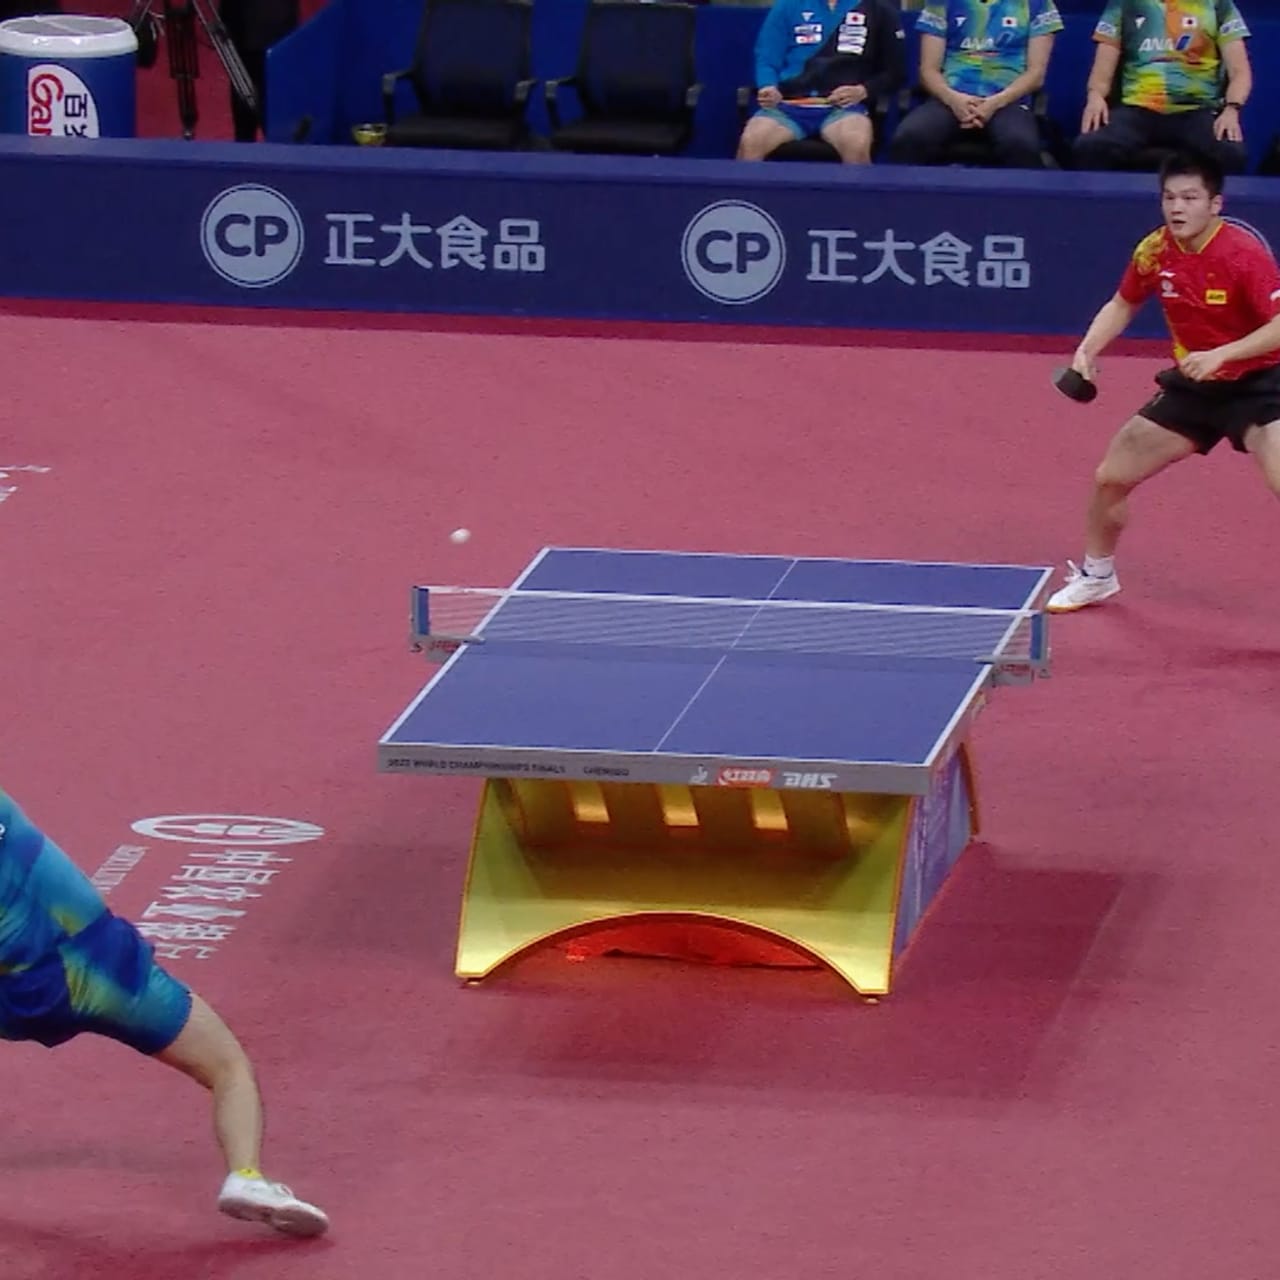 WATCH Is this the best table tennis rally of 2022?